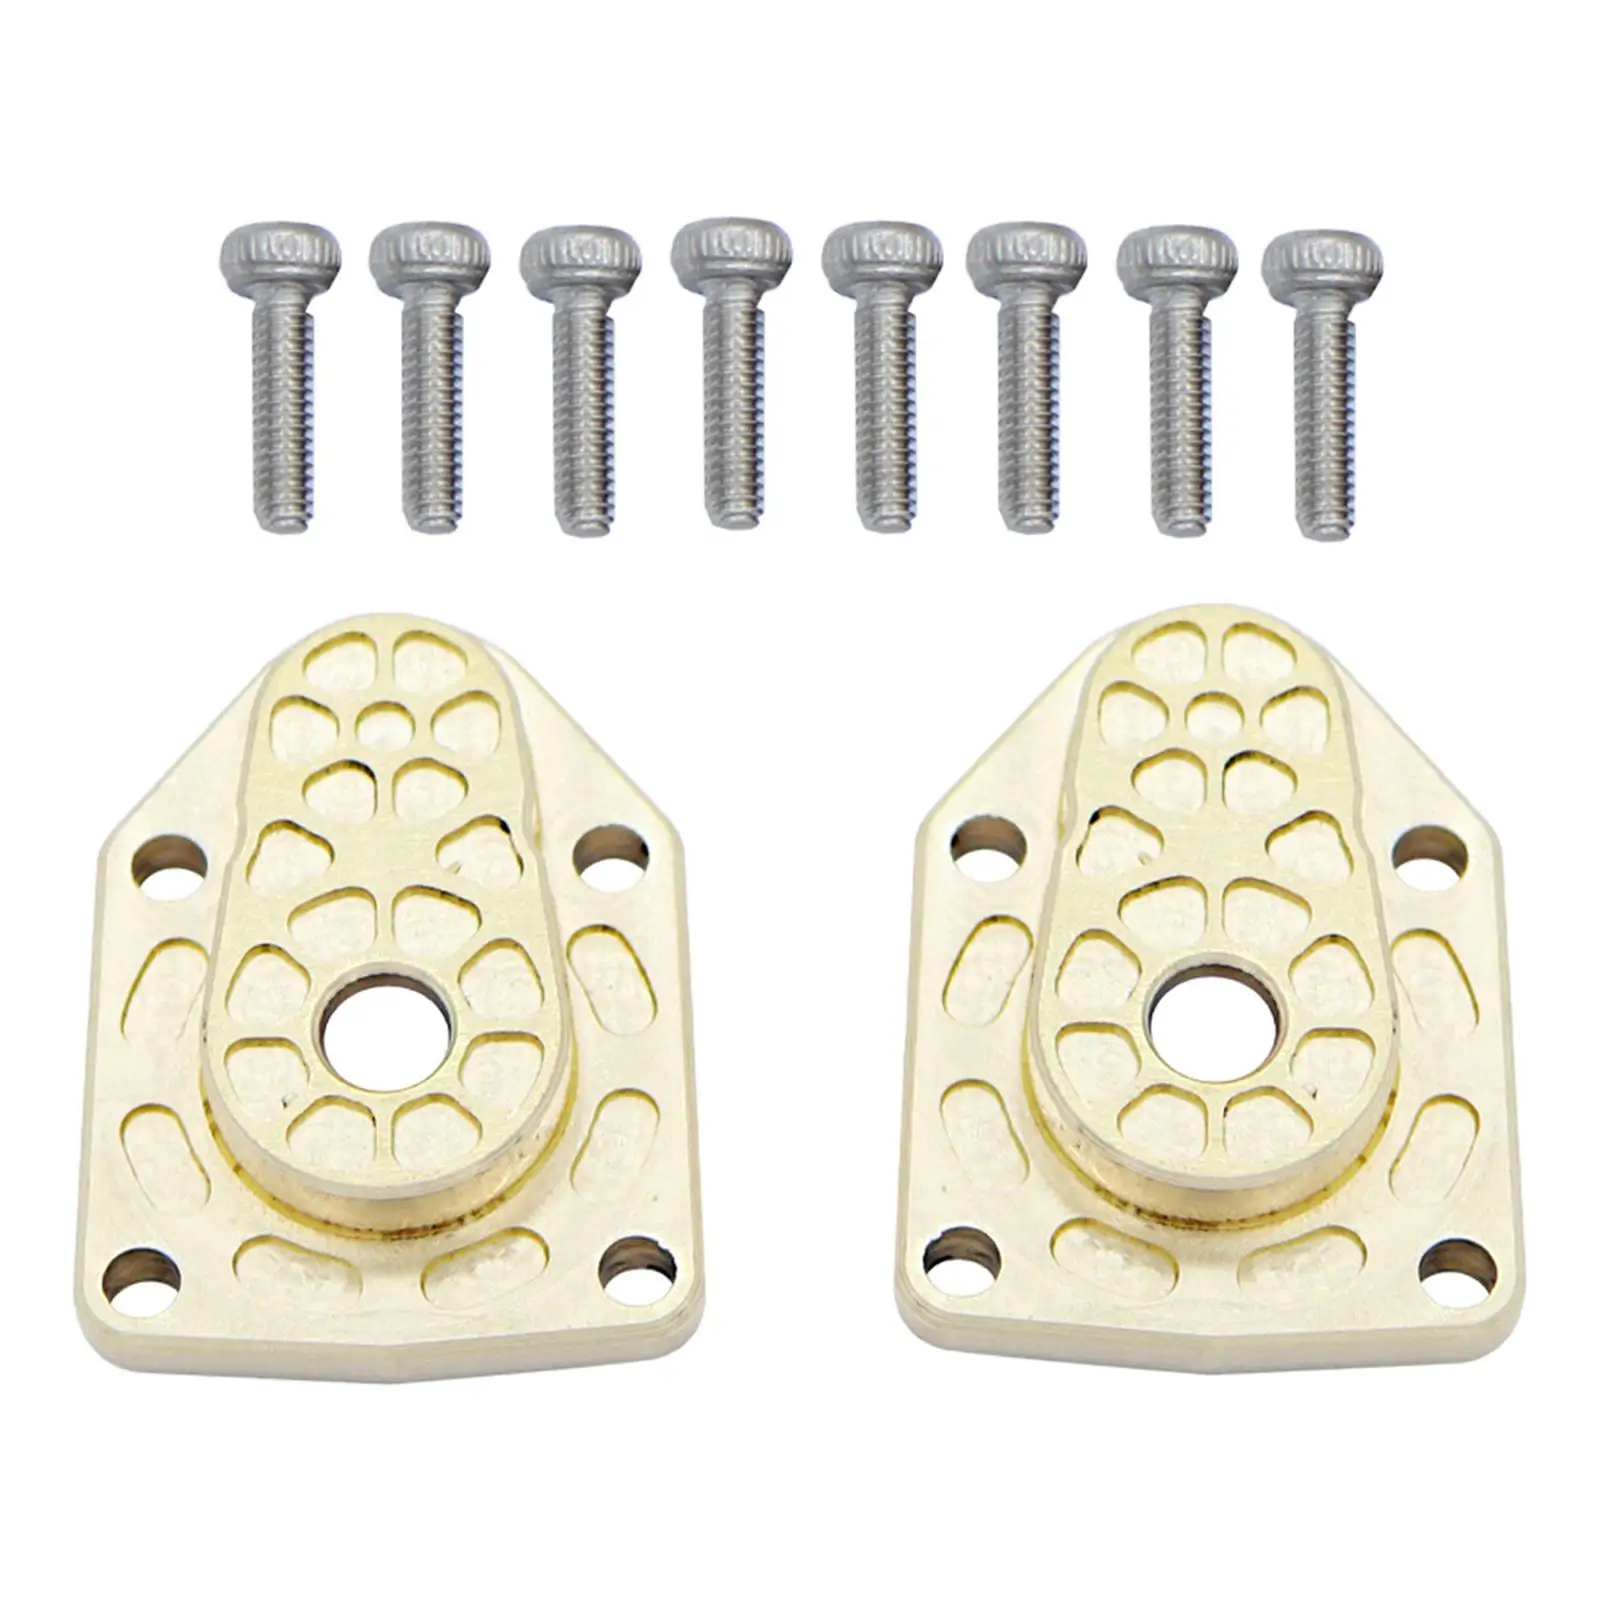 2x Housing Cover RC Brass upgrage Cover for 1/18 RC Crawler Car DIY Modified